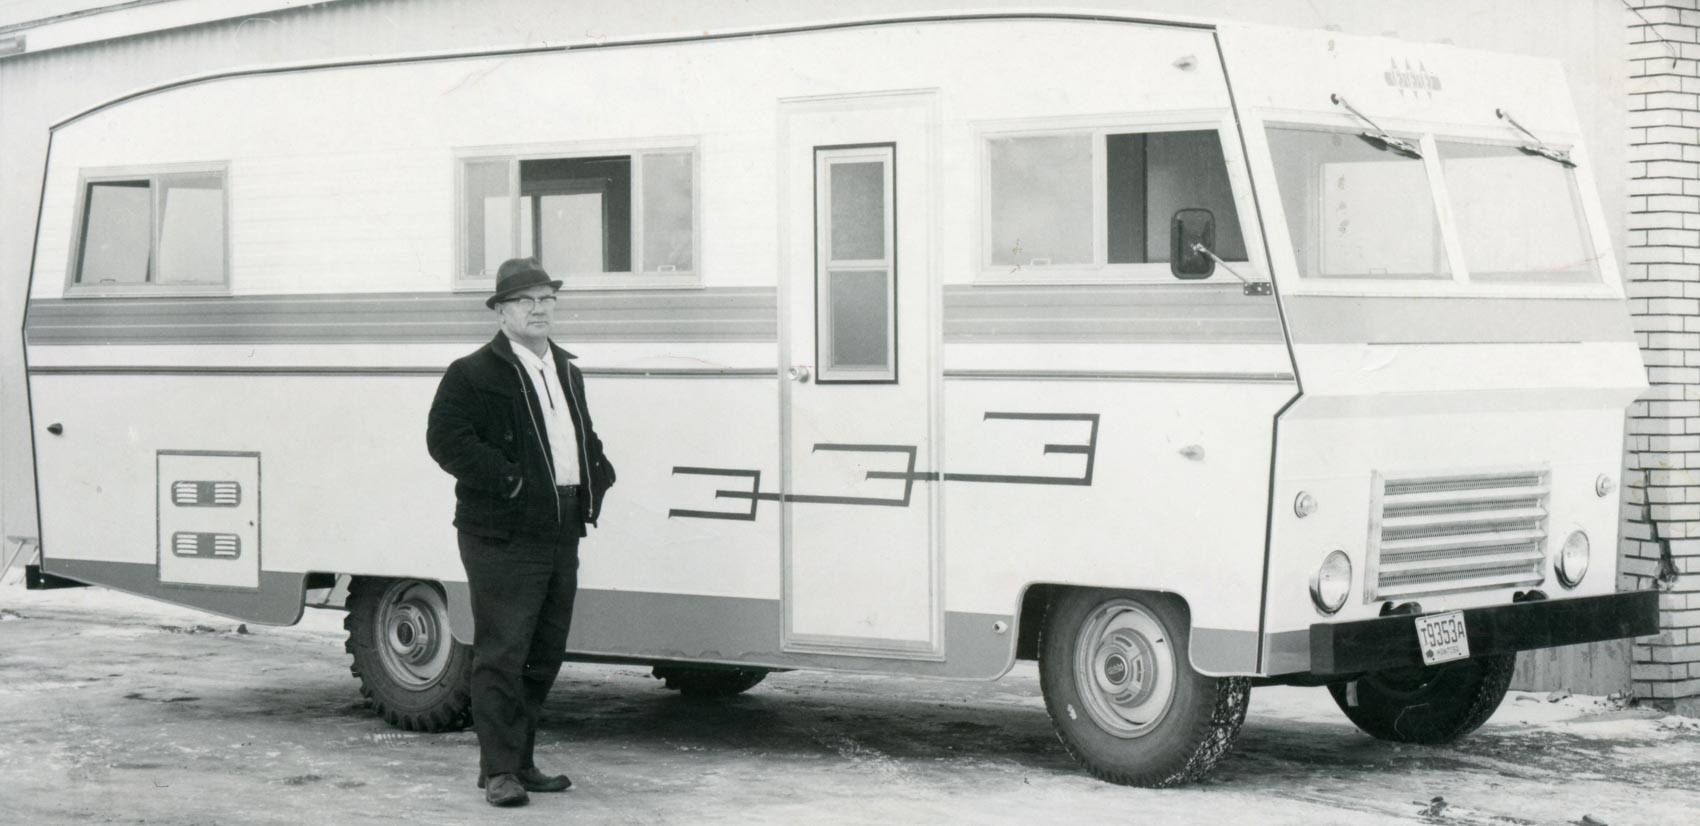 Triple E’s co-founder standing in front of an early RV